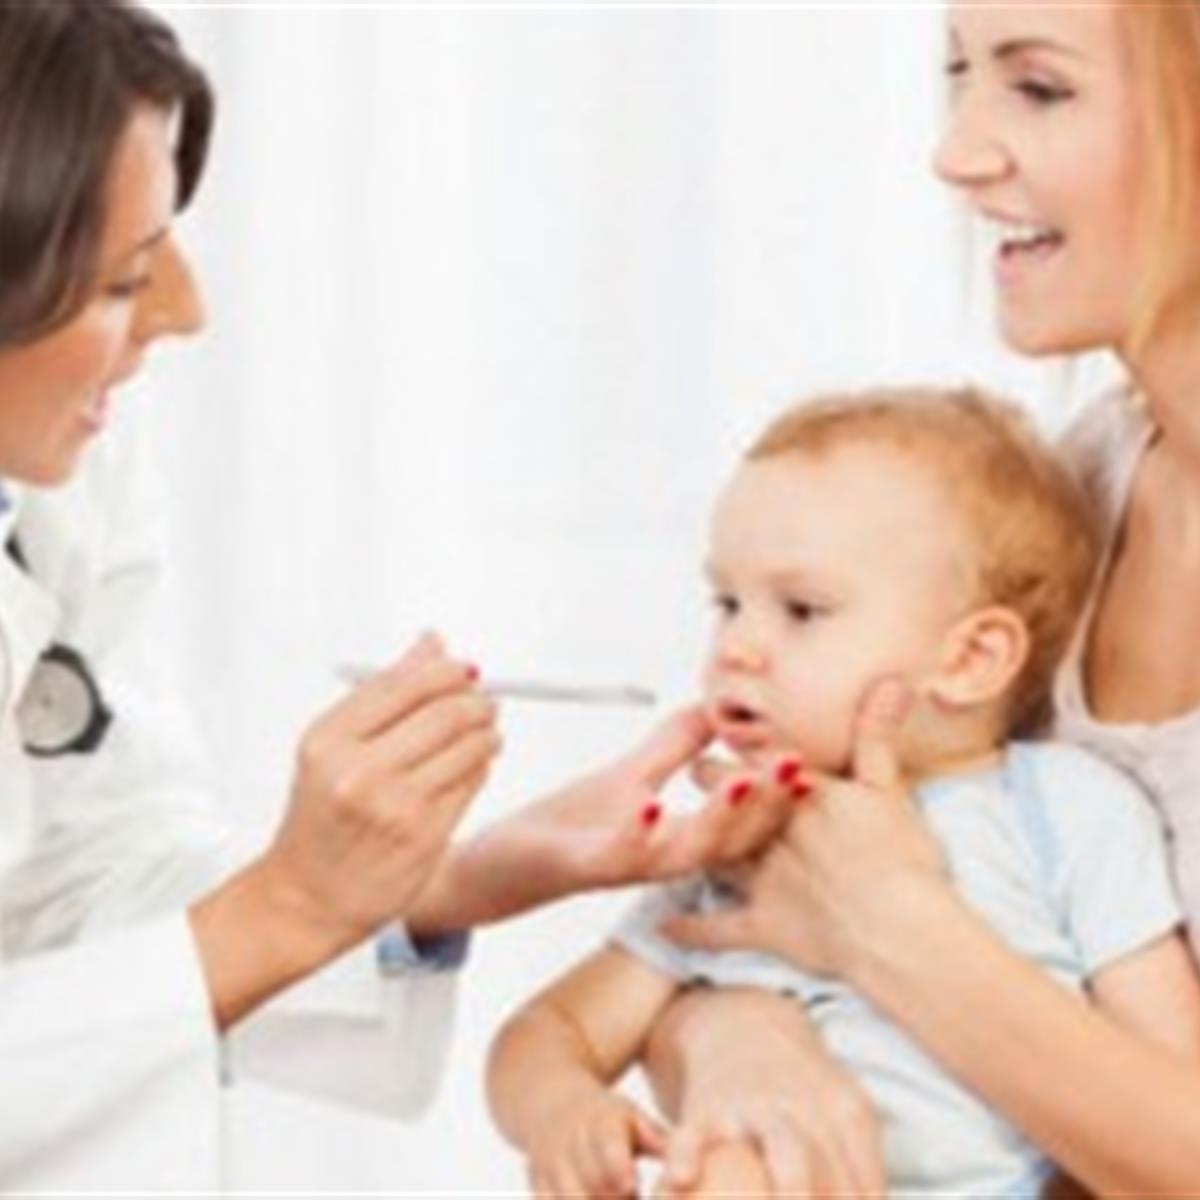 Can infants get strep throat?